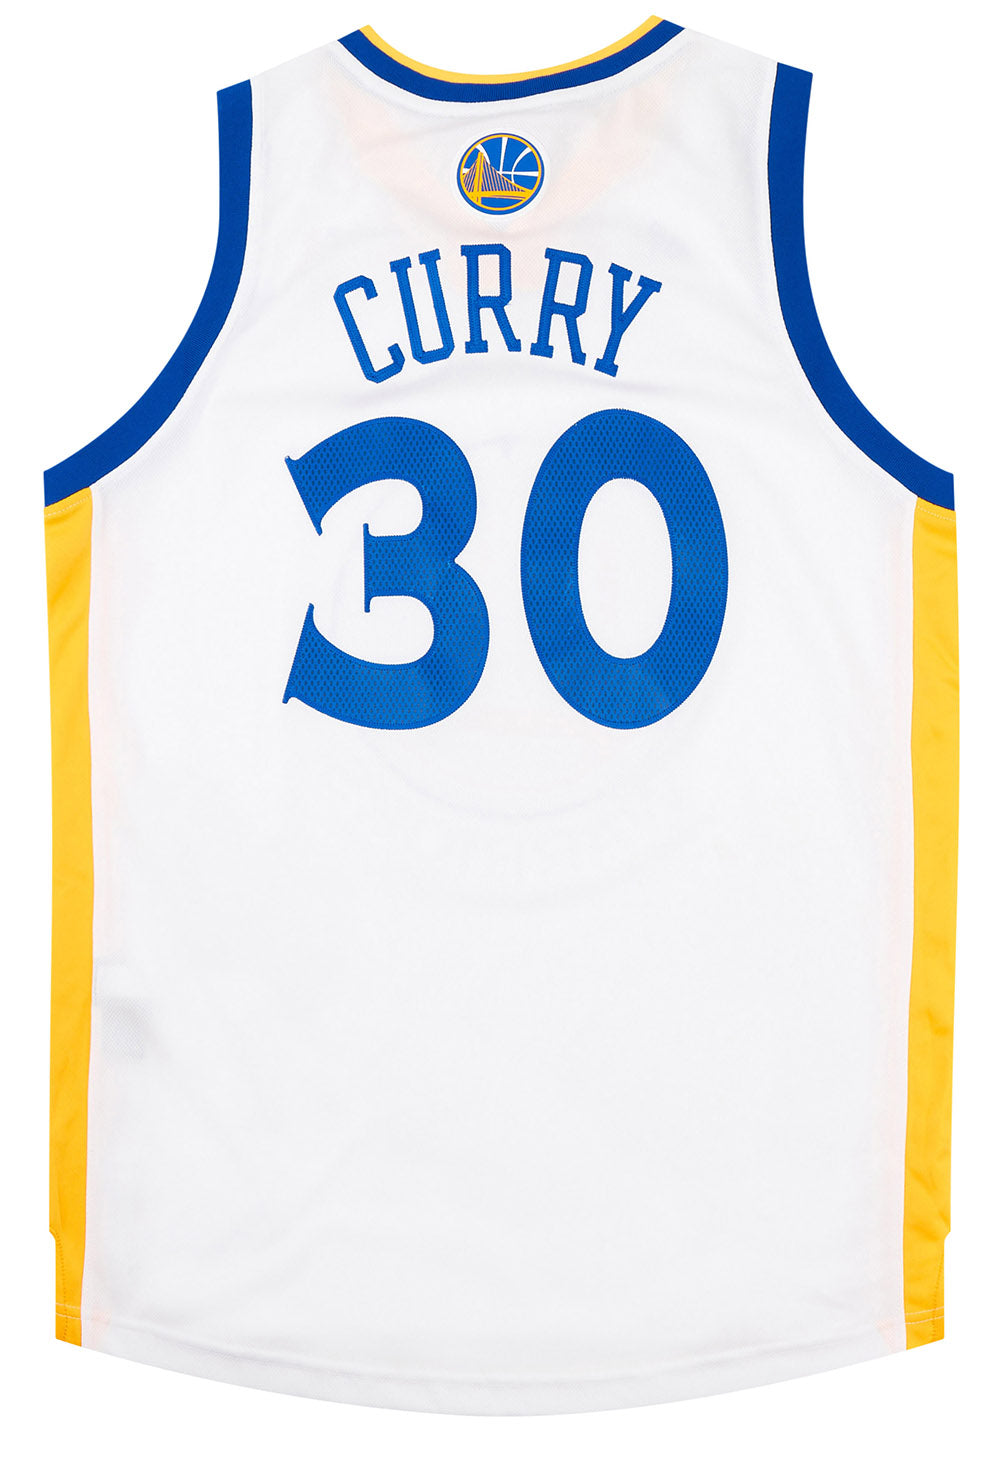 stephen curry jersey malaysia